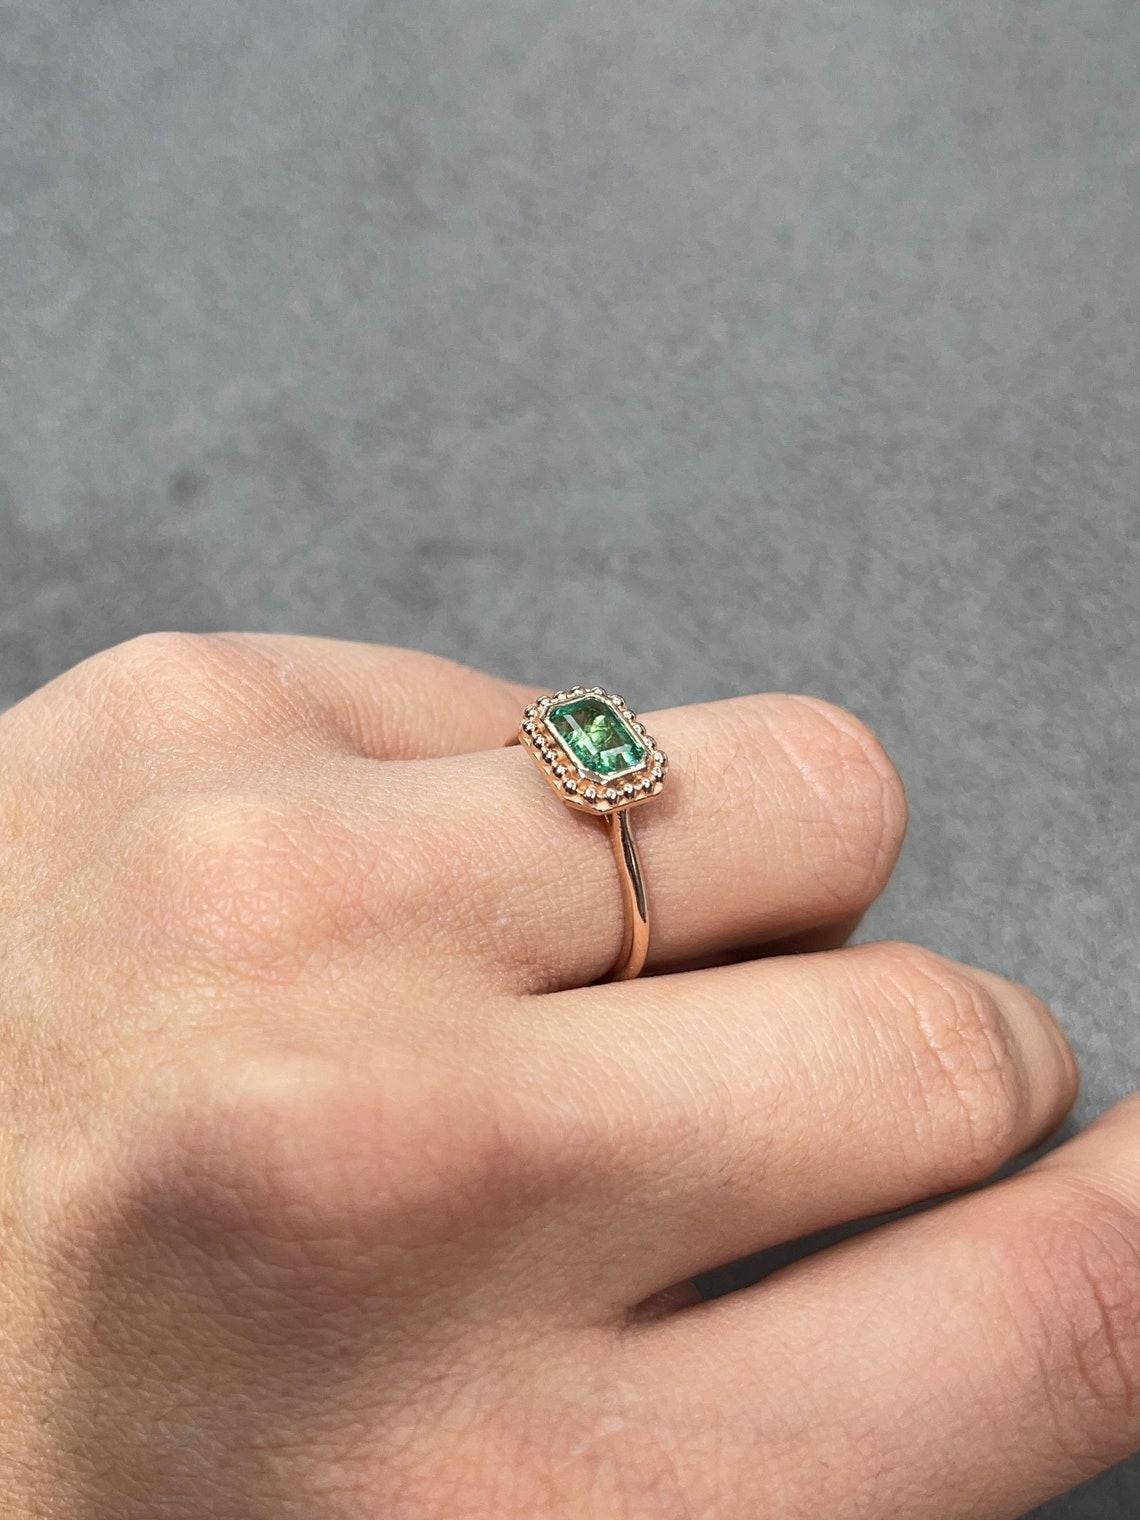 0.90ct 14K Bezel Set Emerald Cut Emerald Solitaire Rose Gold Bead Ring In New Condition For Sale In Jupiter, FL